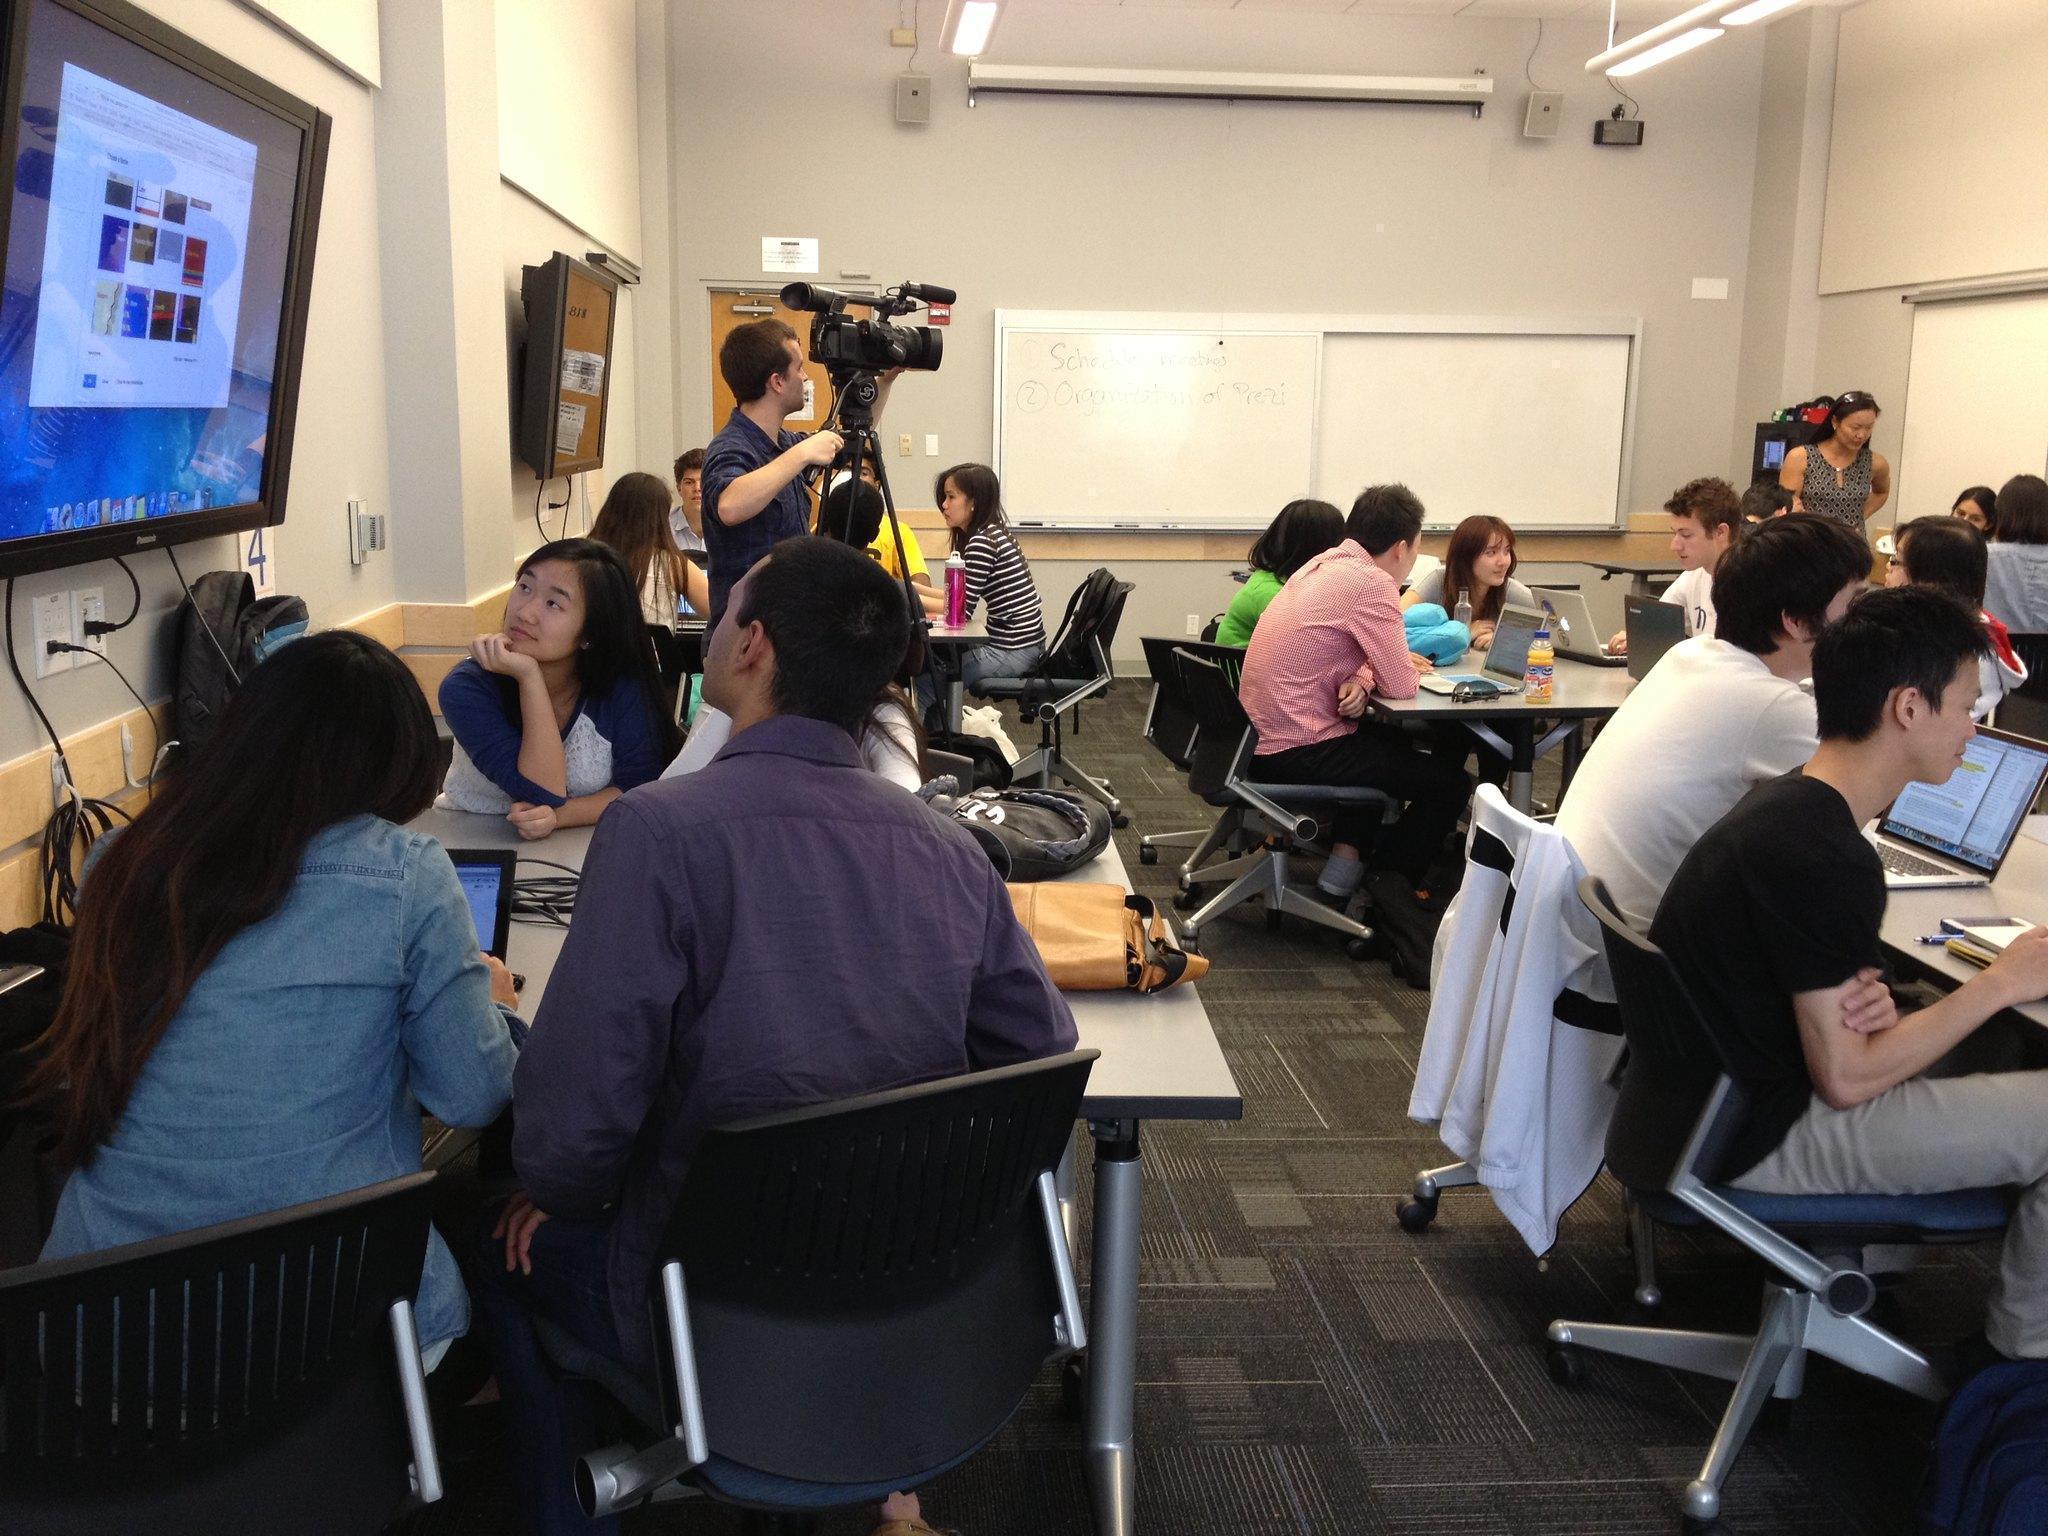 Photograph of a classroom with students working at several tables, two large monitors mounted on the wall, and a camera mounted on a tripod.